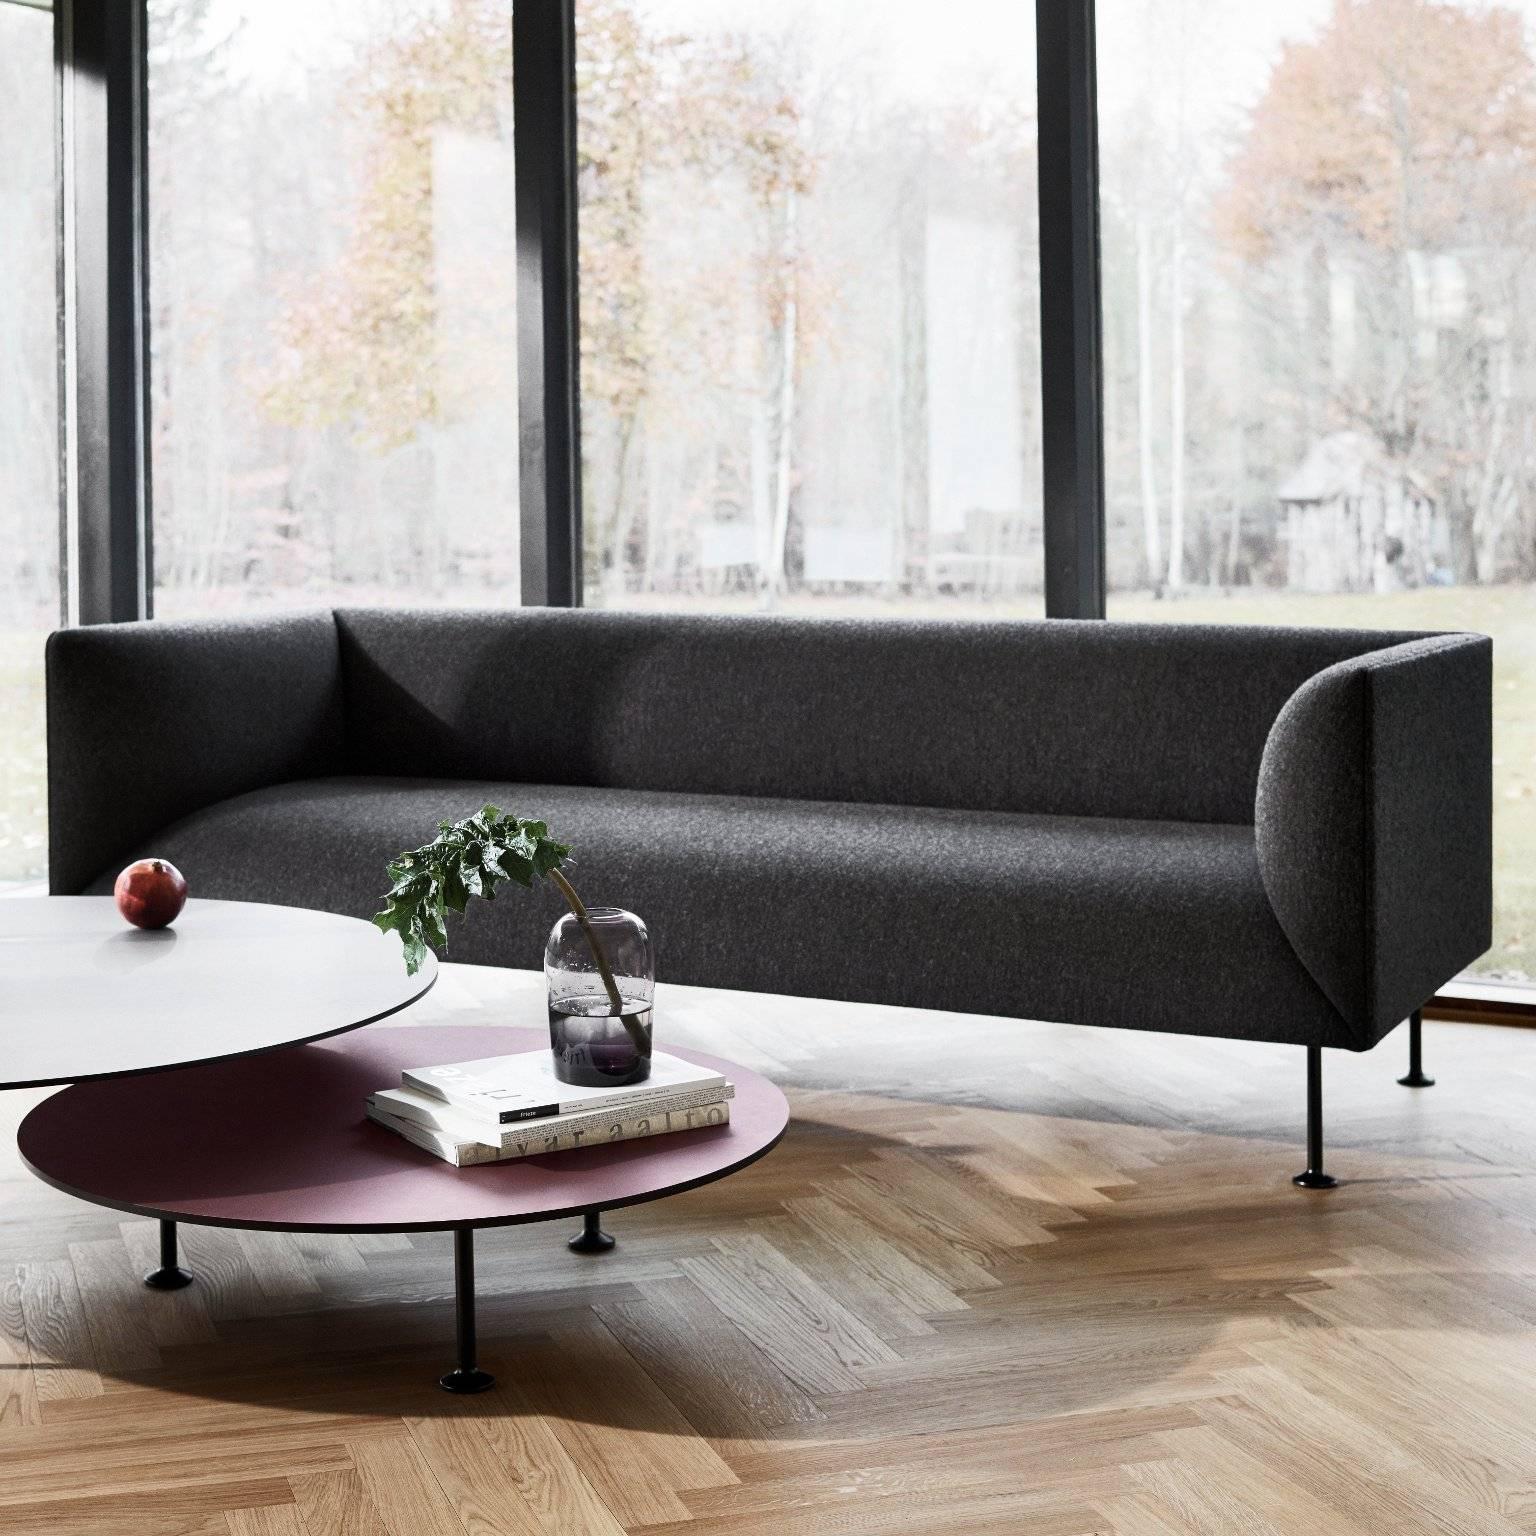 Godot is a comfortable and generous sofa series comprising two and three-seat sofas as well as an armchair. The inner 